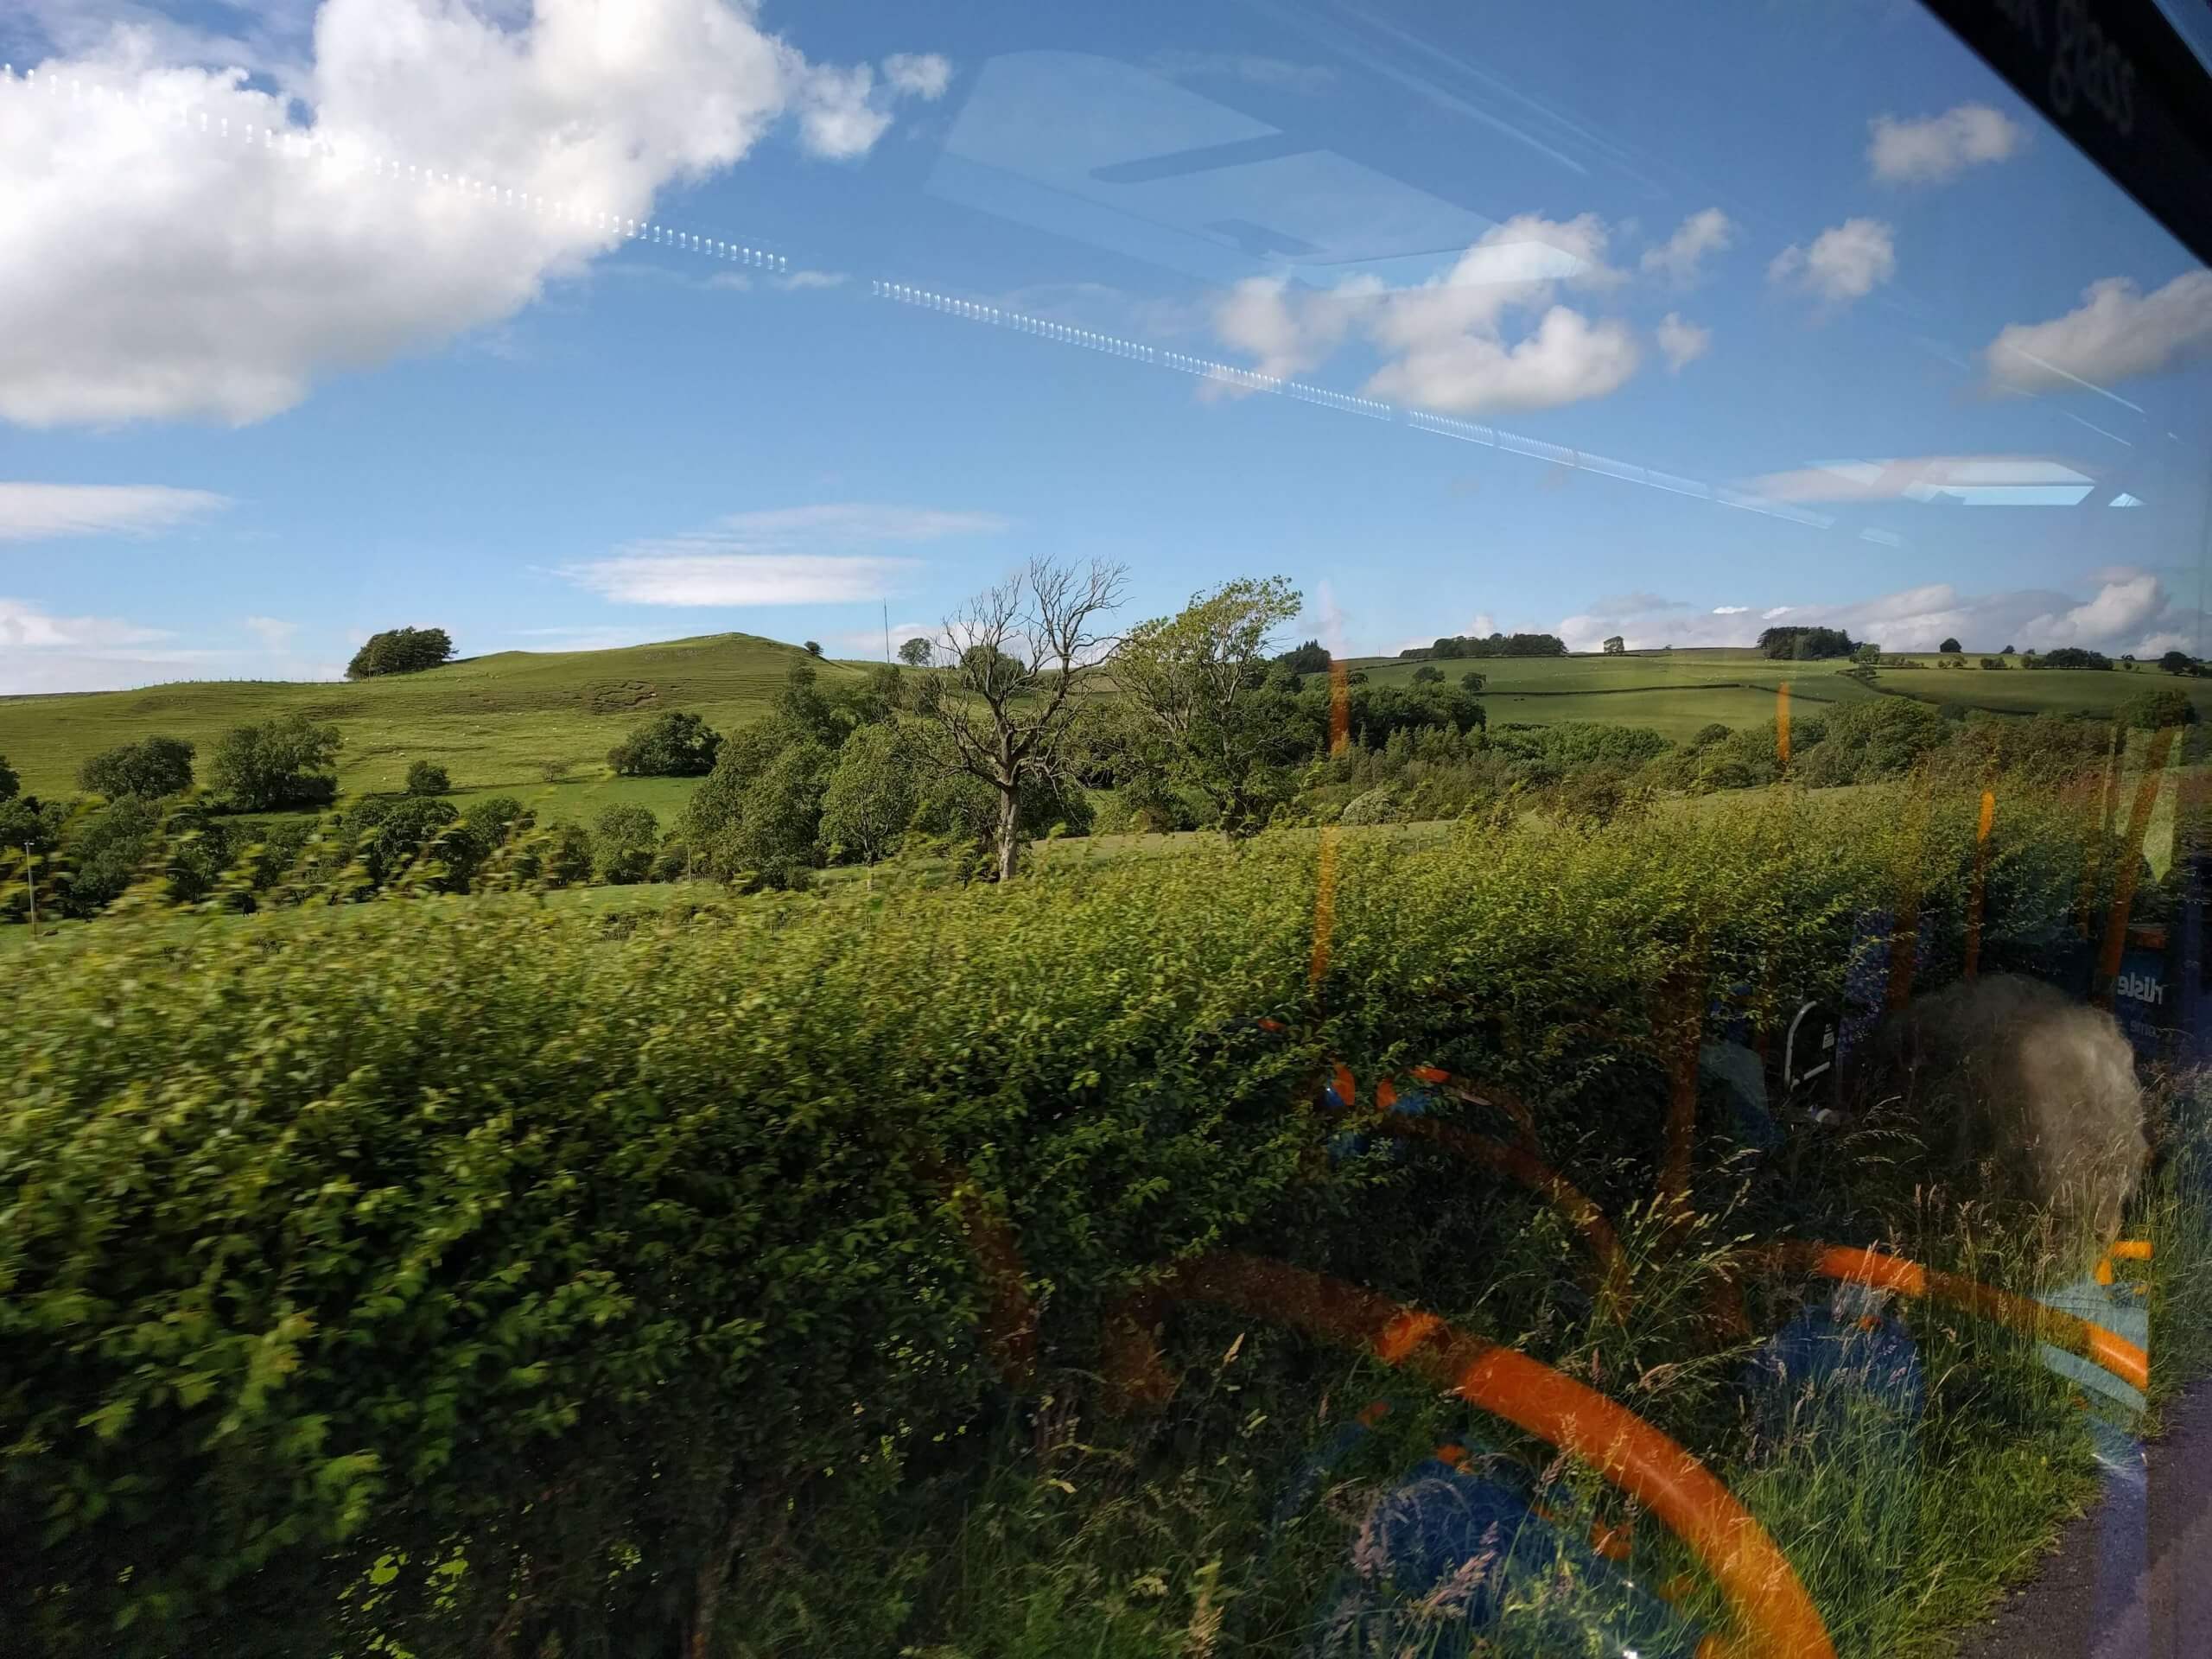 View from the Stagecoach 73 as you head out of Caldbeck towards Carlisle